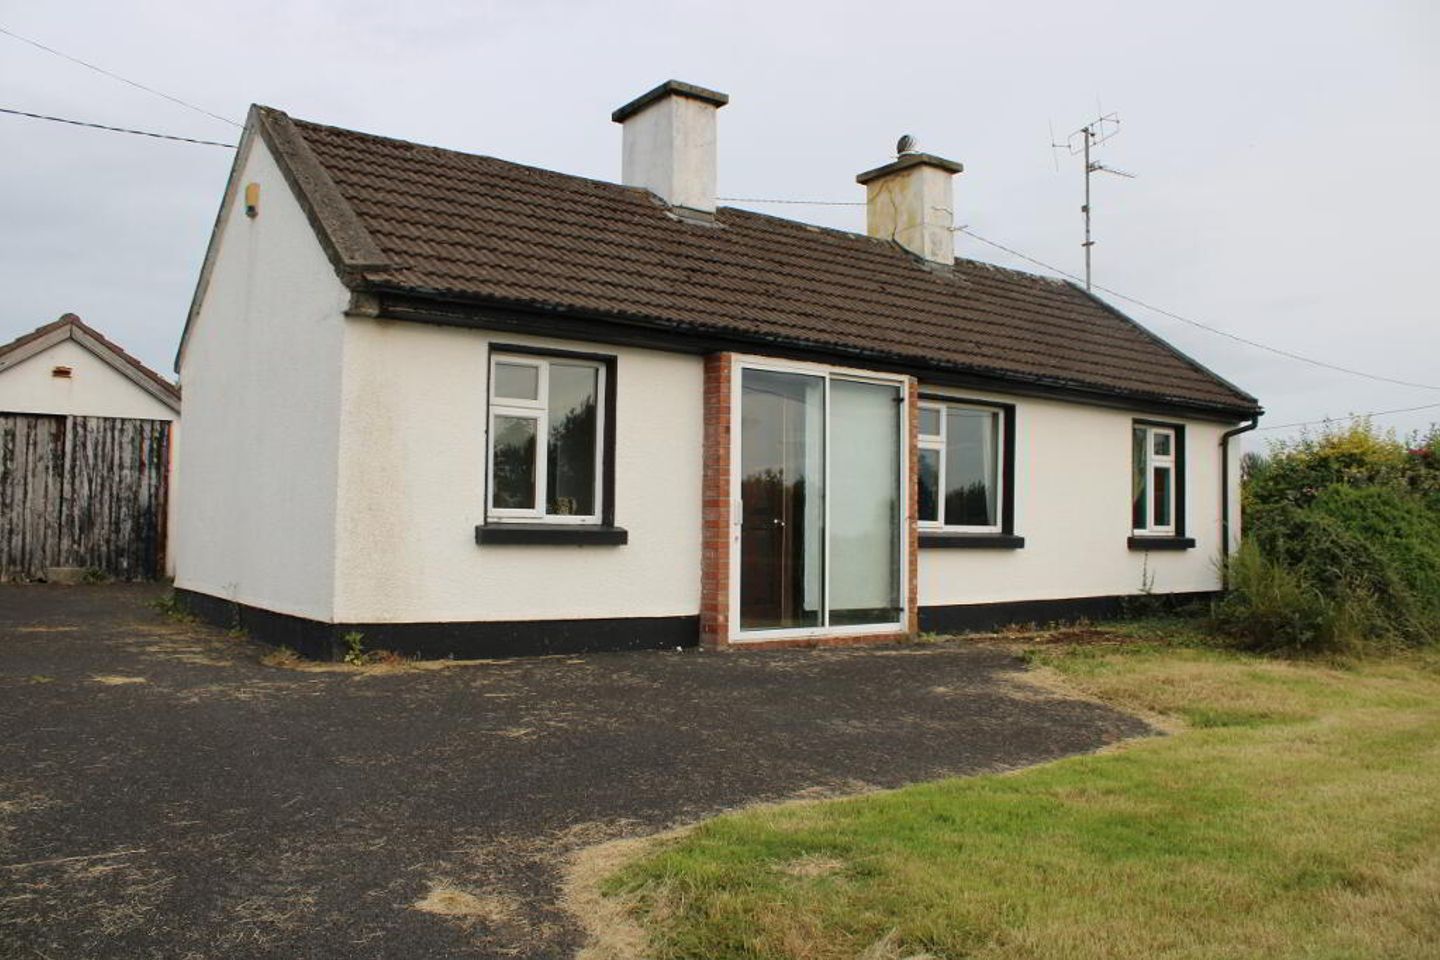 2 Ballyoliver, Rathvilly, Co. Carlow, R93YP74